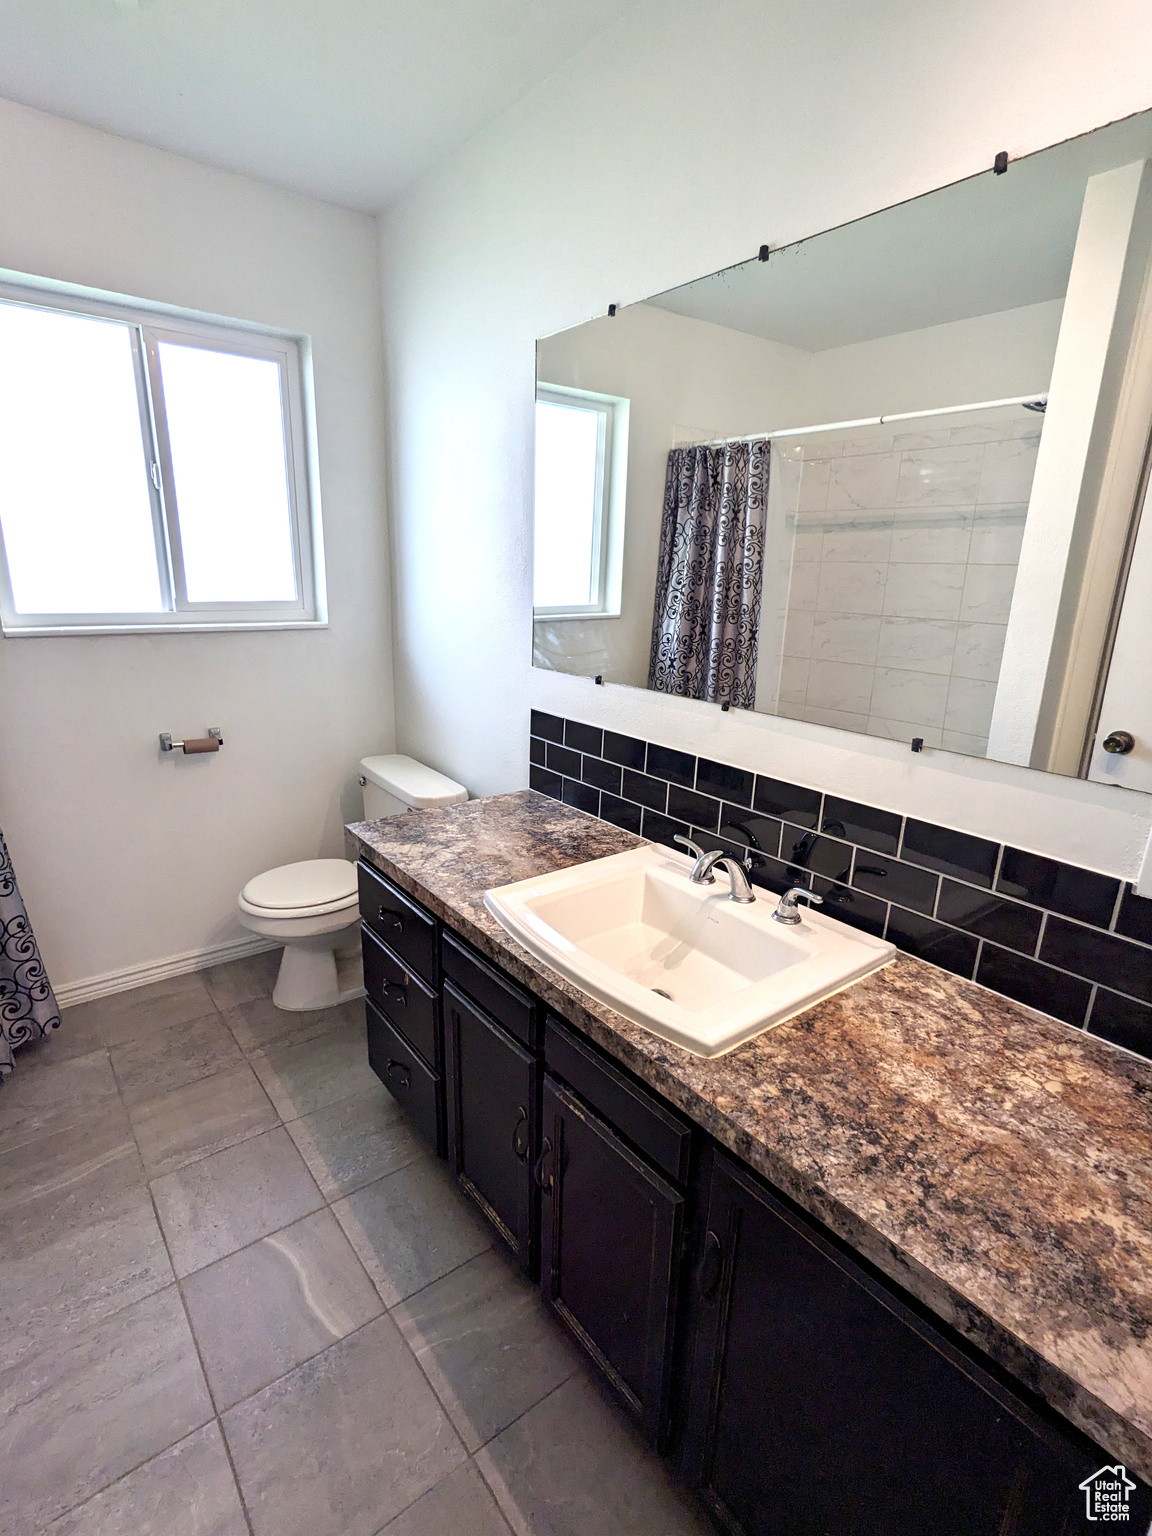 Bathroom featuring backsplash, a wealth of natural light, vanity, and toilet